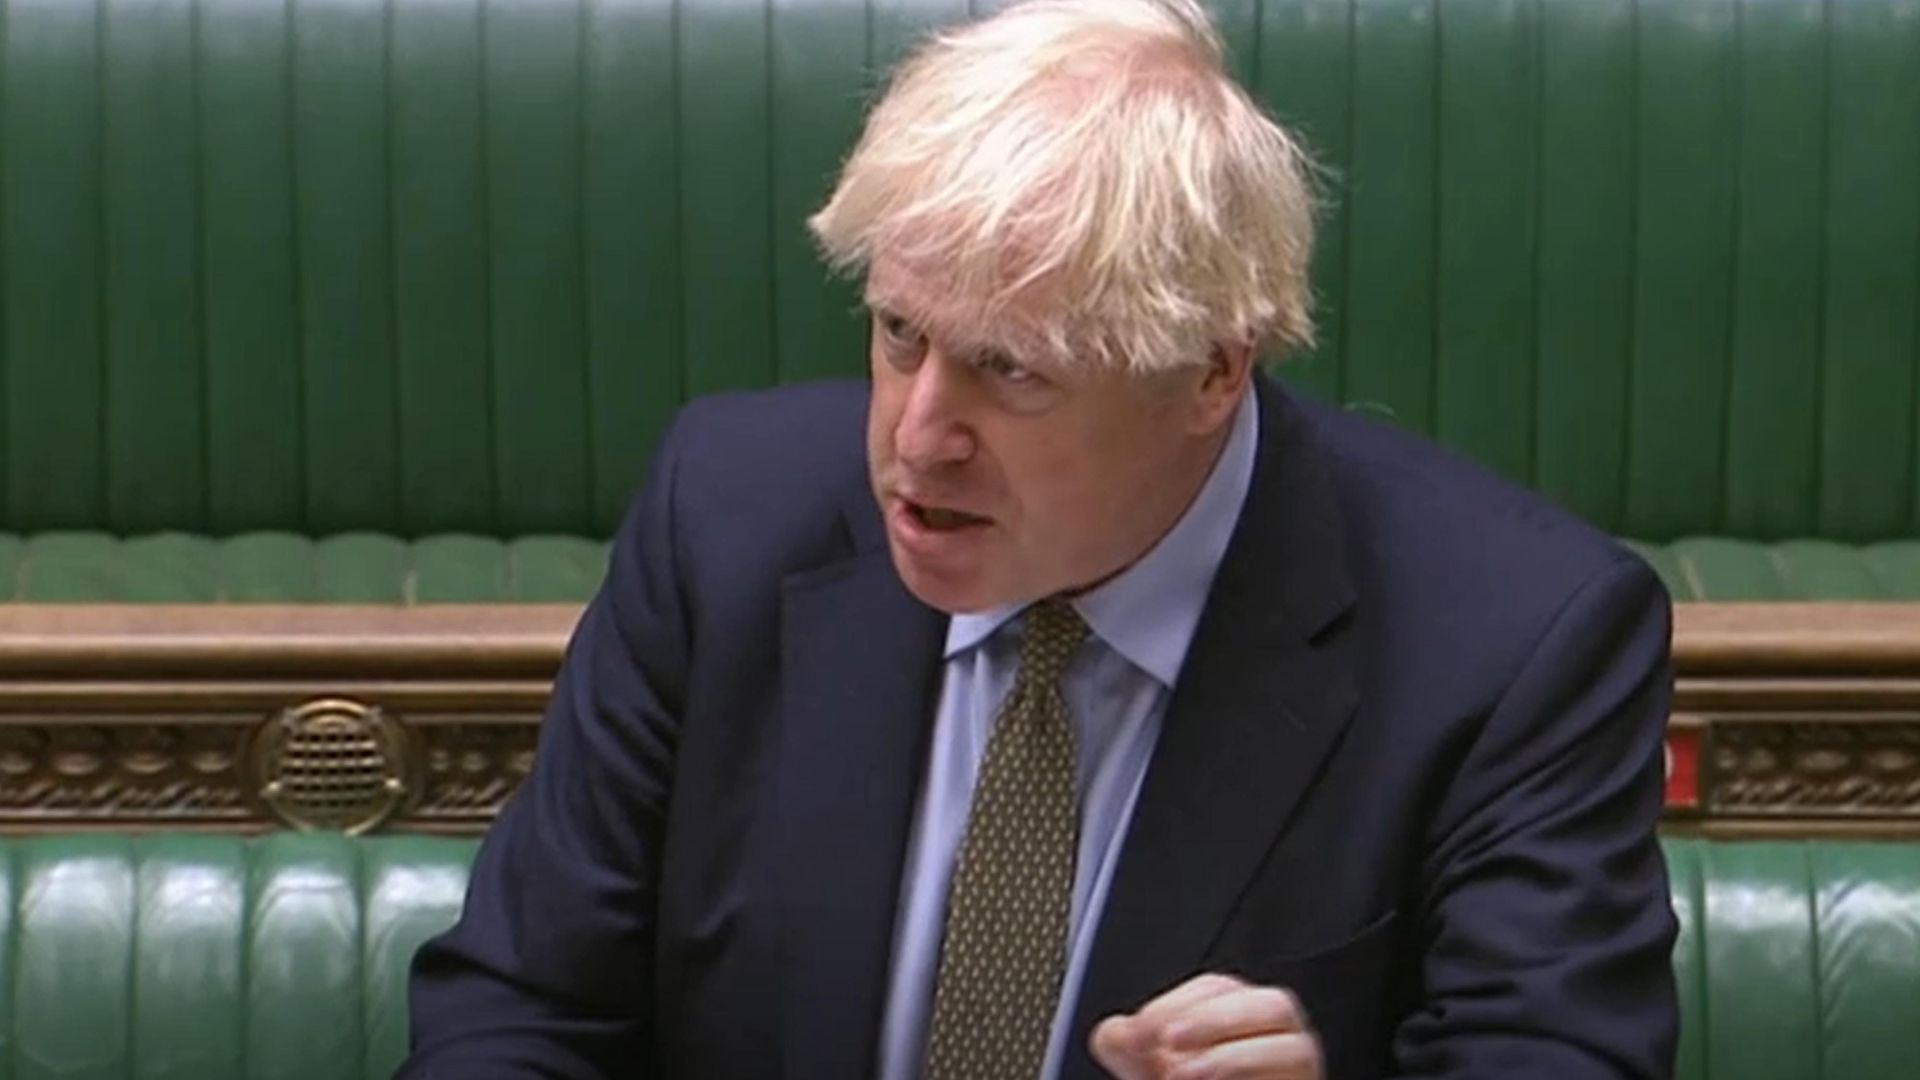 Prime minister Boris Johnson was told to 'keep up' with the latest coronavirus restrictions after appearing not to know them during Prime Minister's Questions - Credit: PA